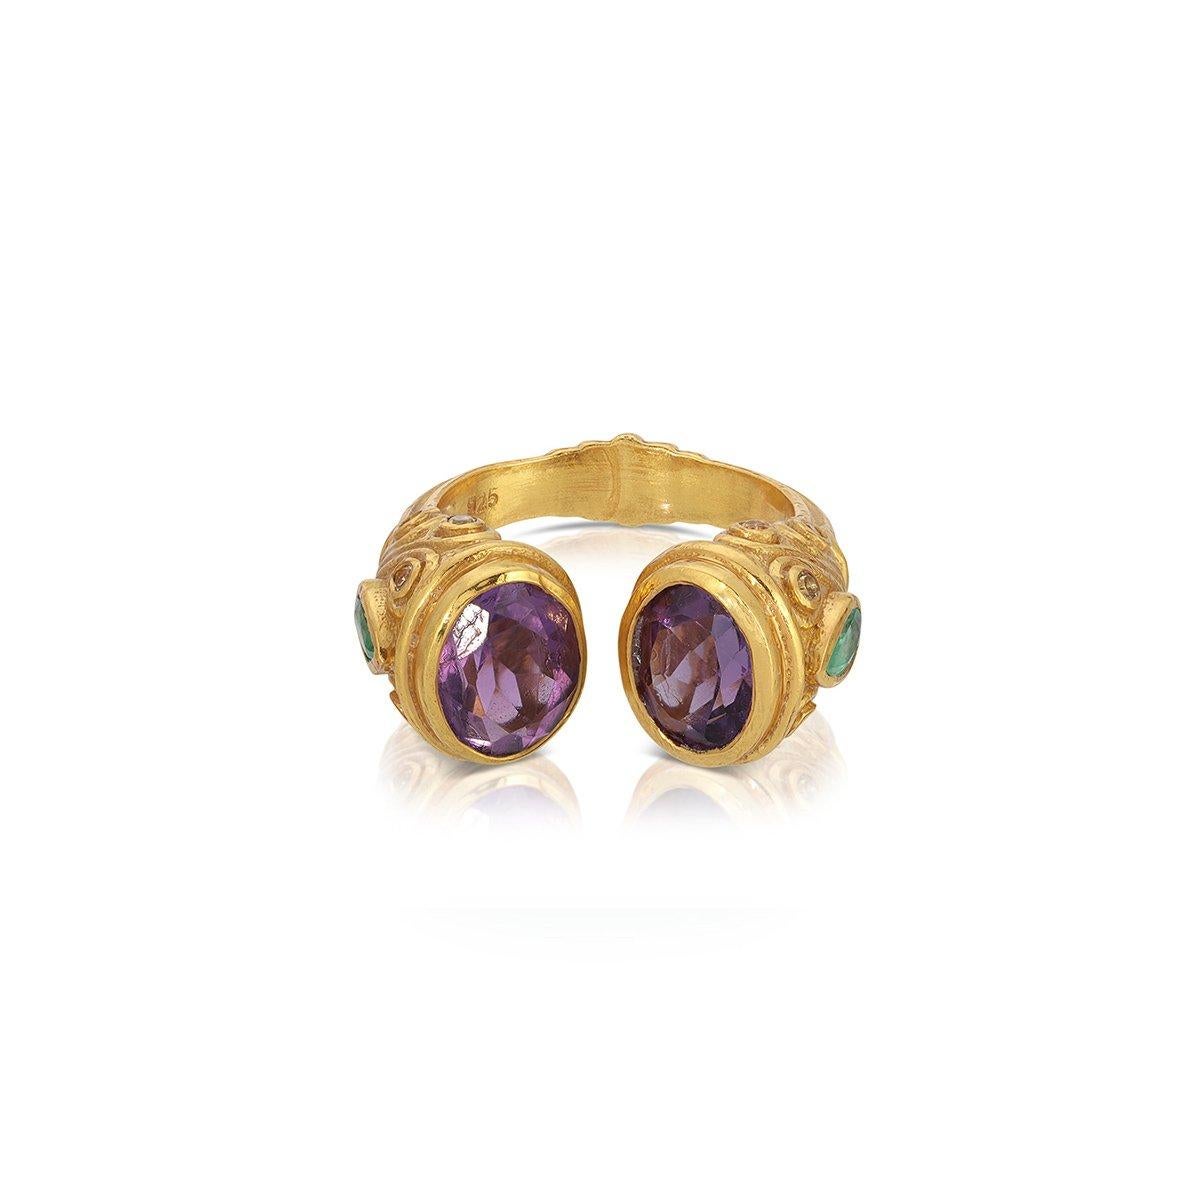 A contemporary interpretation of the opulent jewelry style of the Moguls... An Amethyst and Emerald ring featuring an open ended band tipped with luminous purple Amethyst and set with pear shaped and smaller cirque Emeralds on the side of the